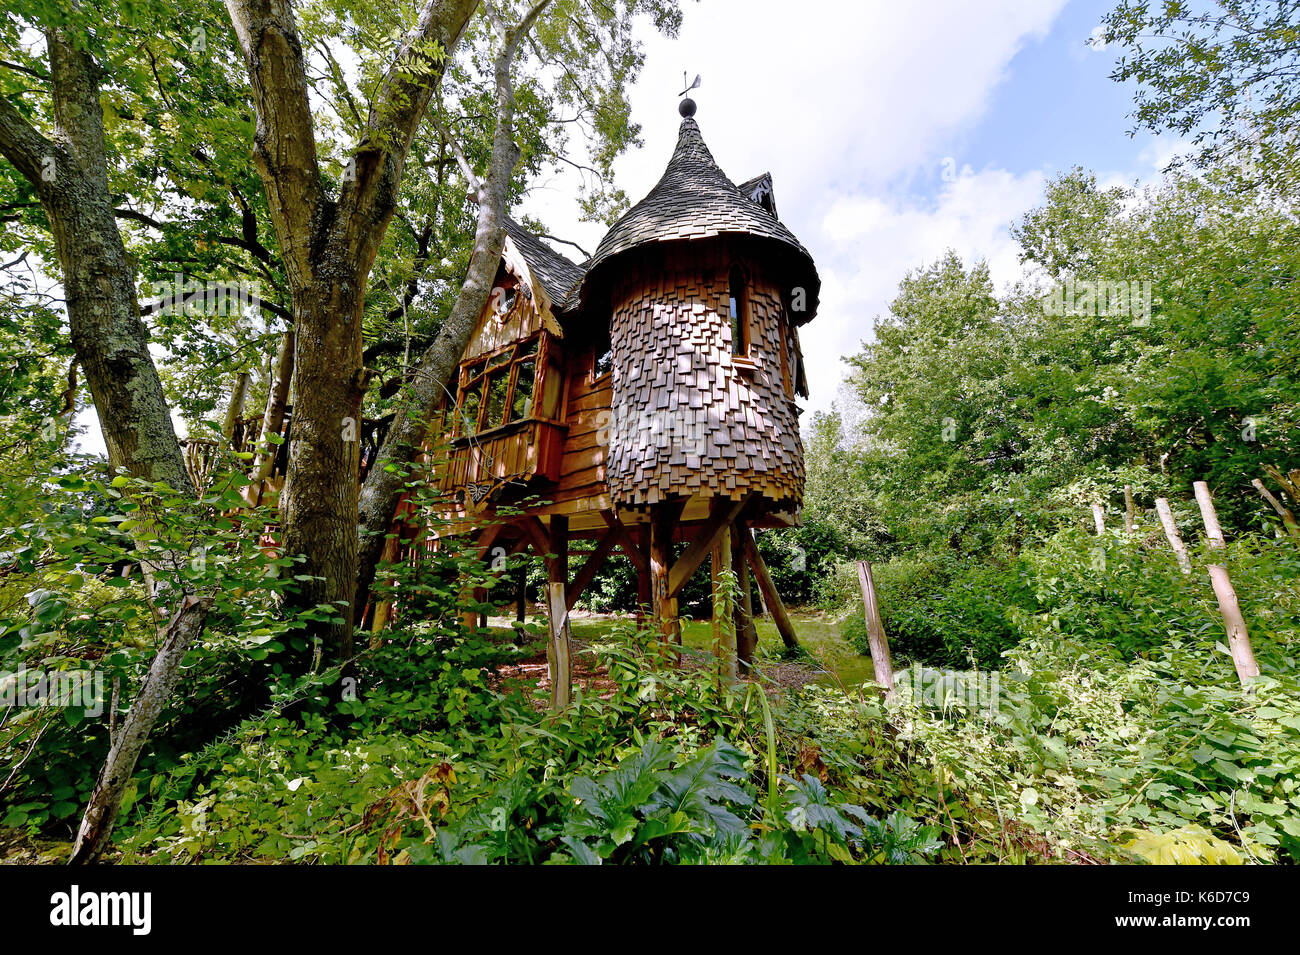 Ditchling Sussex, UK. 12th Sep, 2017. Higgledy Tree House next door to a new tree house unveiled at Blackberry Wood campsite near Ditchling in Sussex . The new upmarket tree house called Piggledy has been built by campsite owner Tim Johnson and is larger than the original next door tree house called Higgledy . Credit: Simon Dack/Alamy Live News Stock Photo